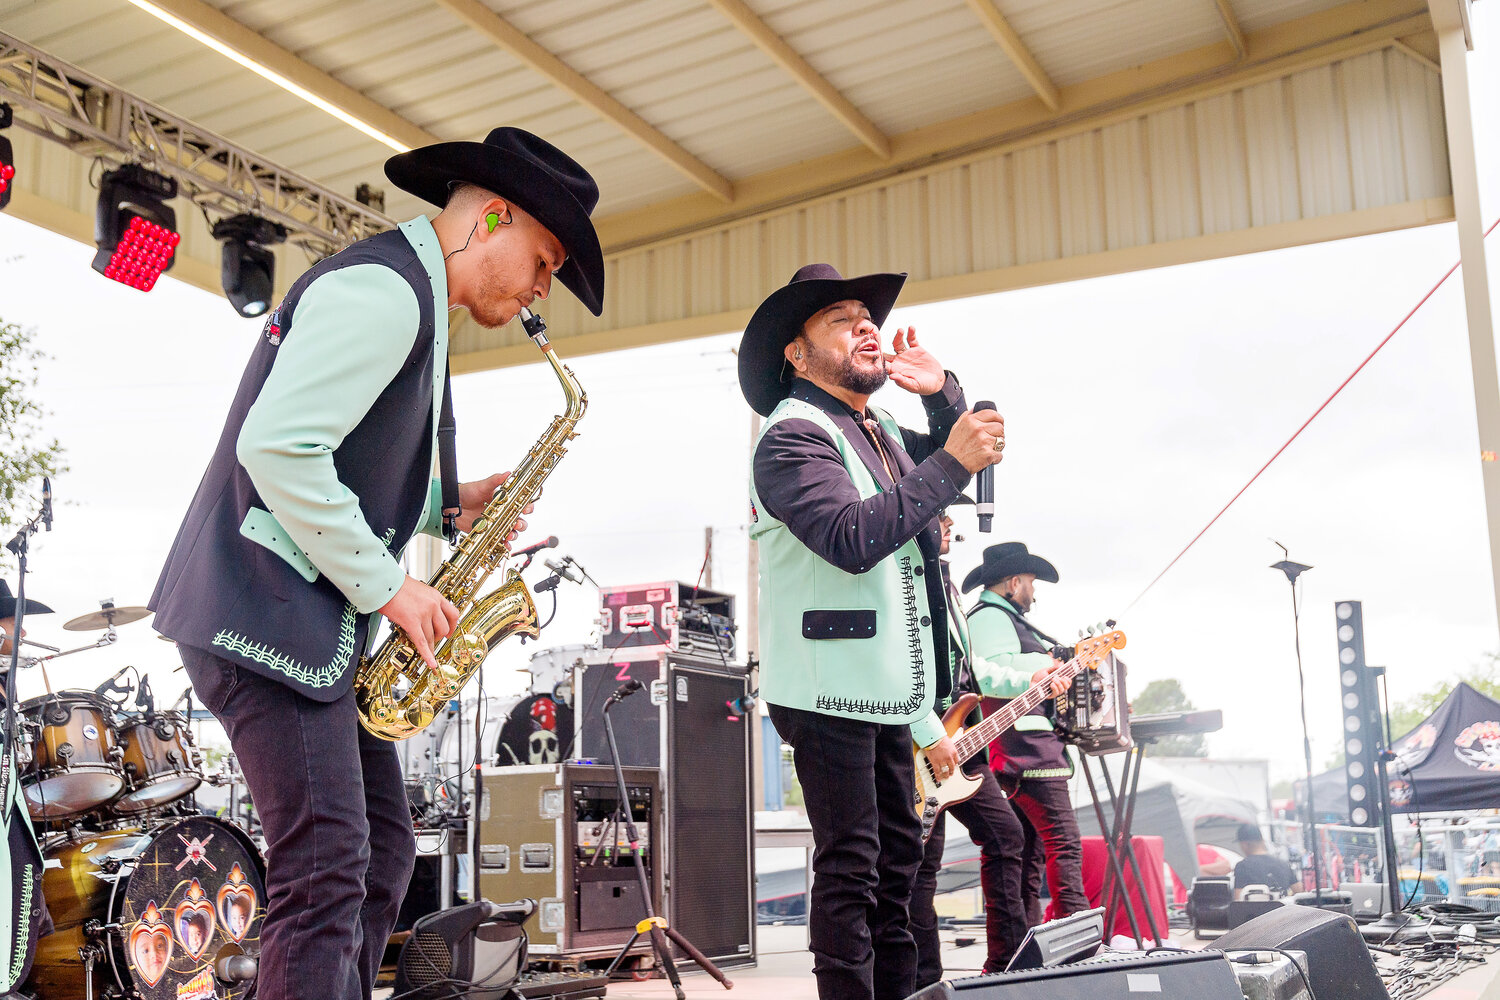 Polo Urias performs at the Santa Rita Star Spangled Celebration on Saturday, July 1st at the Reagan County North Park stage. They were the only band able to perform before the event was canceled due to a downpour.